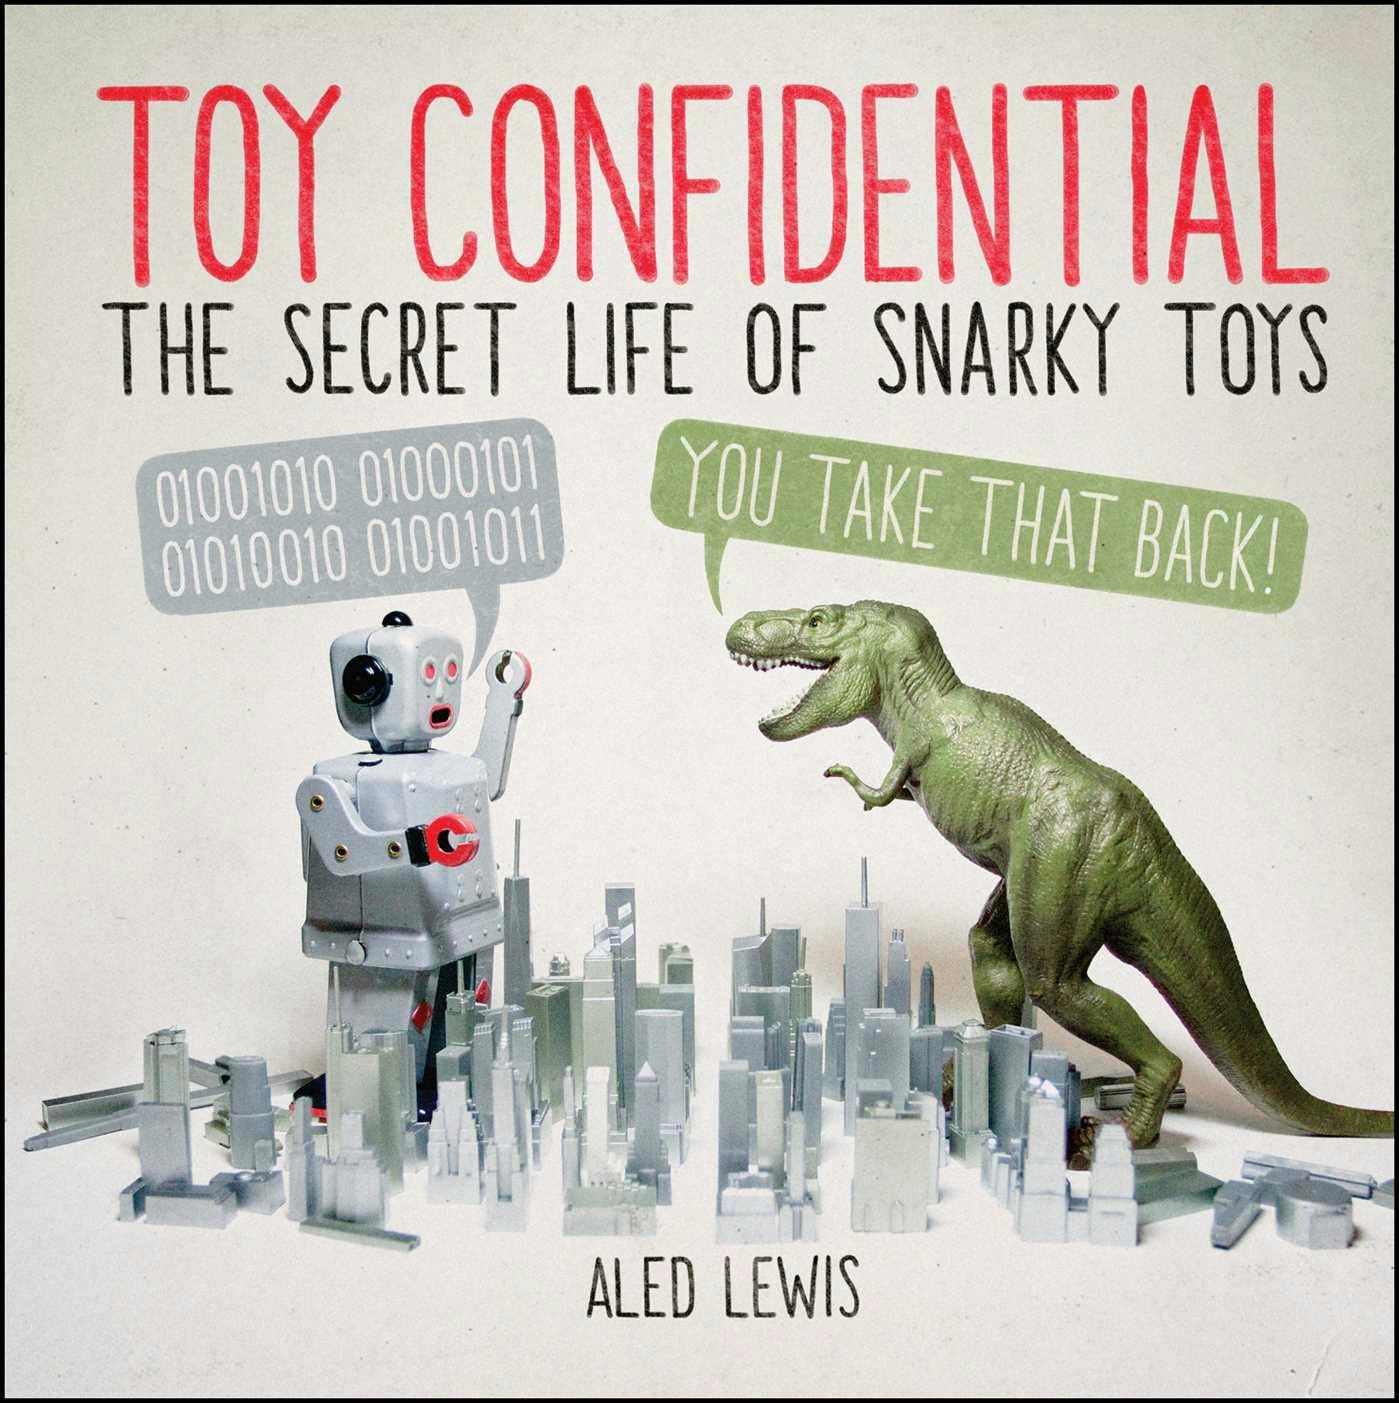 Toy Confidential: The Secret Life of Snarky Toys - Aled Lewis